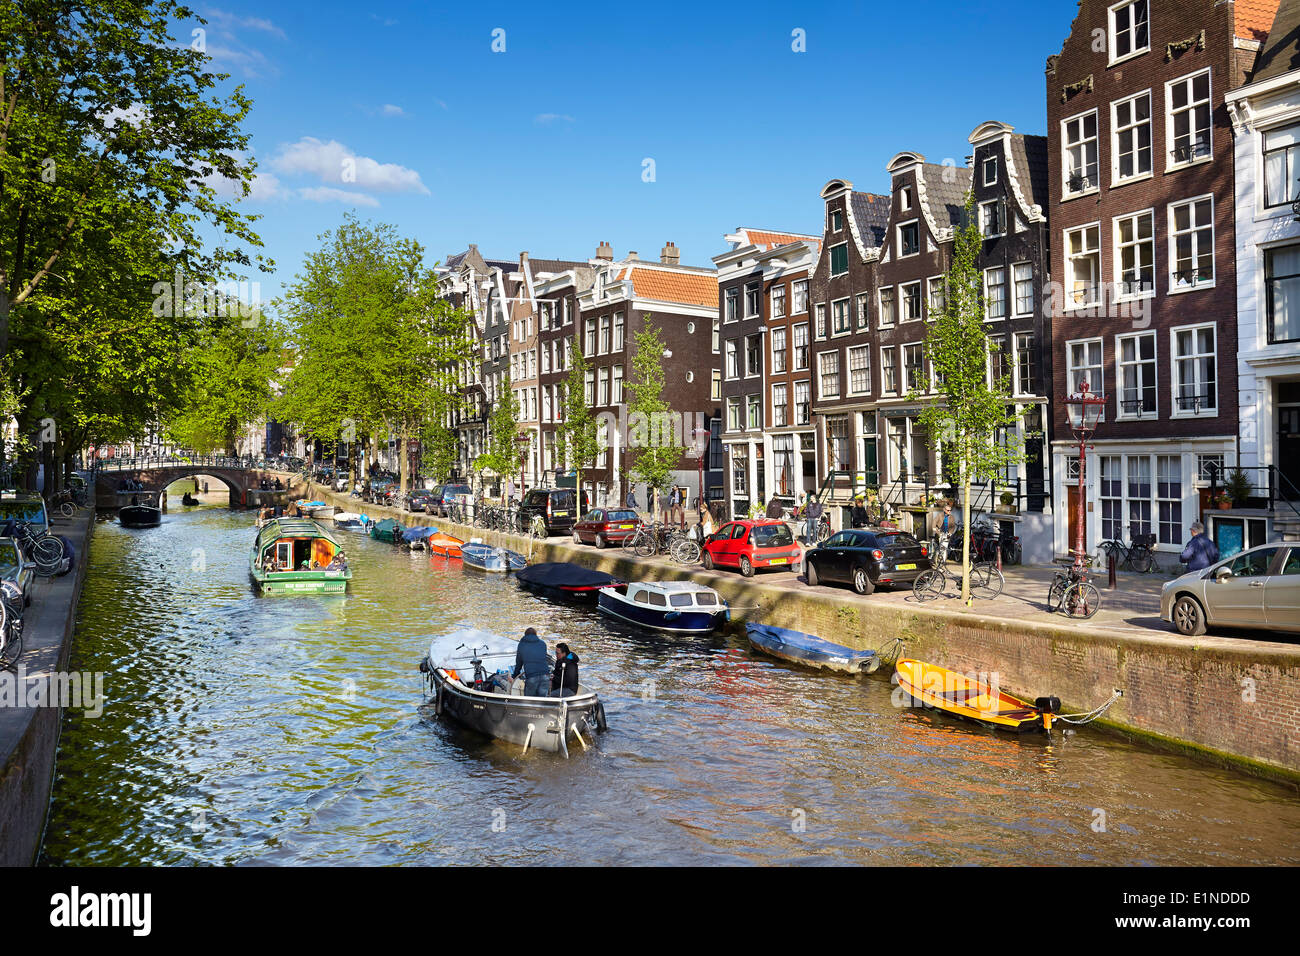 Canal Amsterdam - Hollande Pays-Bas Banque D'Images